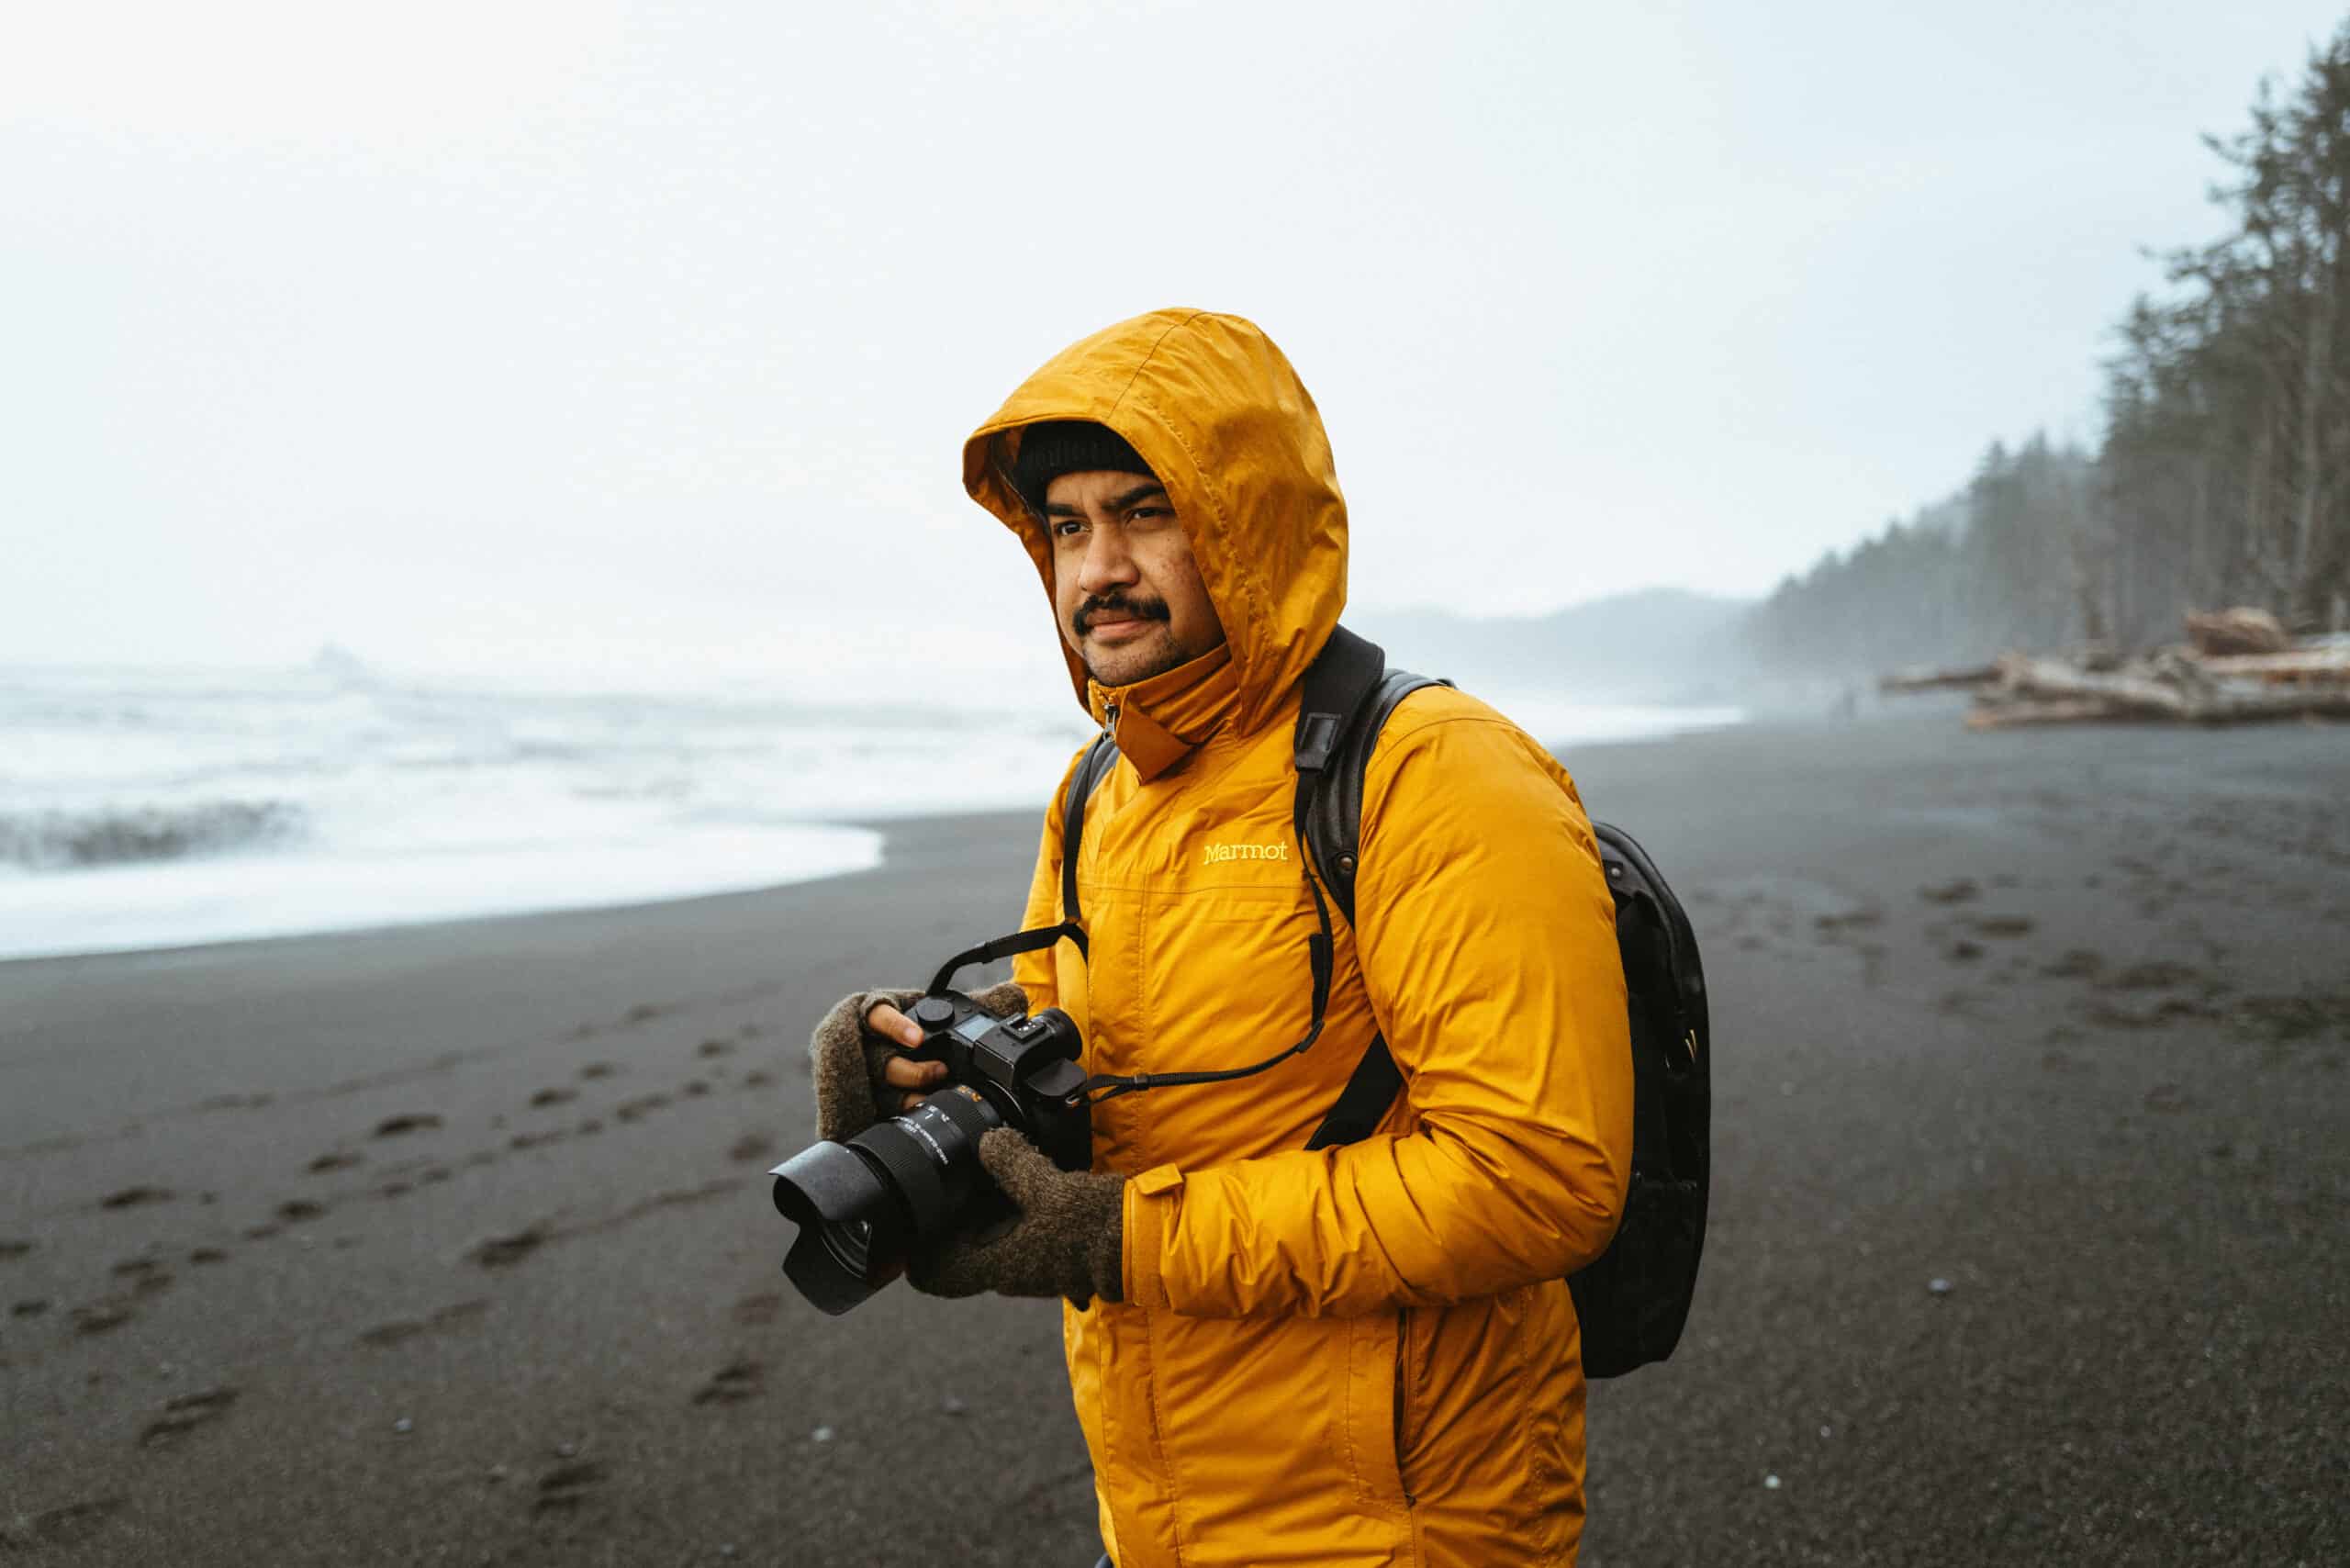 The Foolproof Travel Photography Gear List (8 Essential Tech Categories)